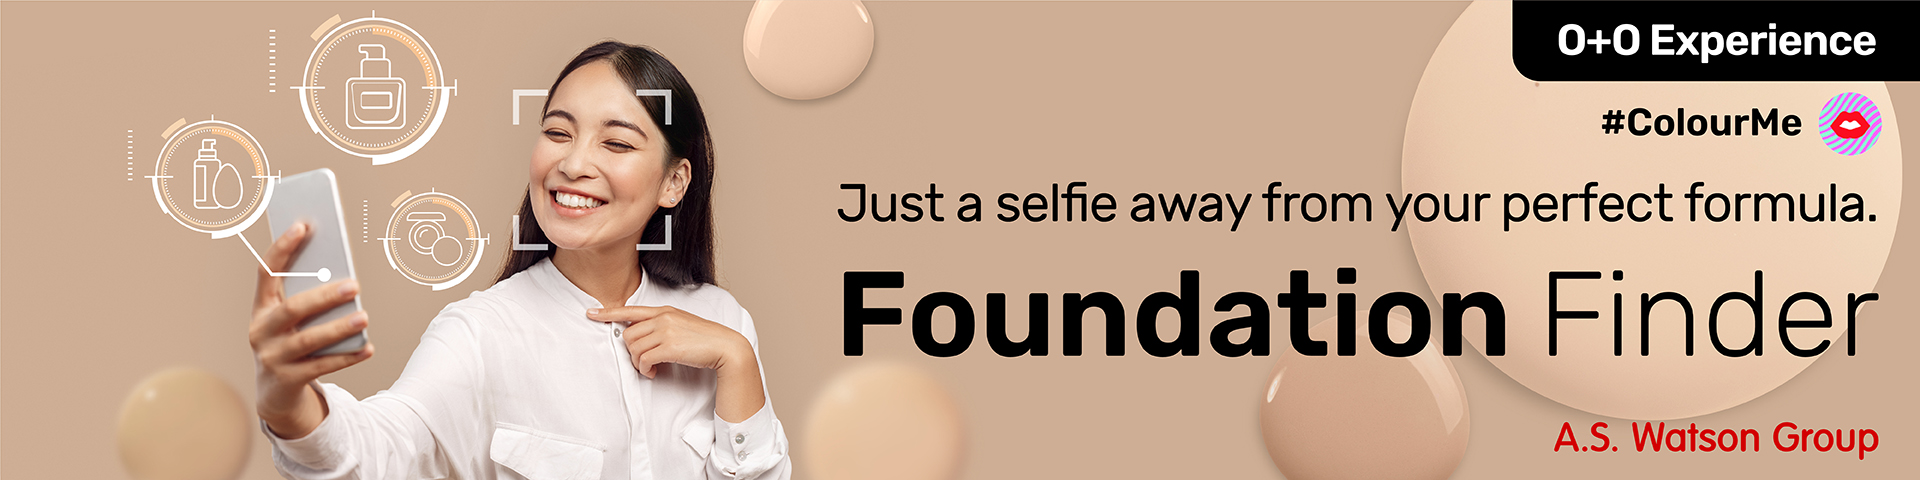 Watsons Launches Foundation Finder AI Tool To Help Customers Find the Perfect Match